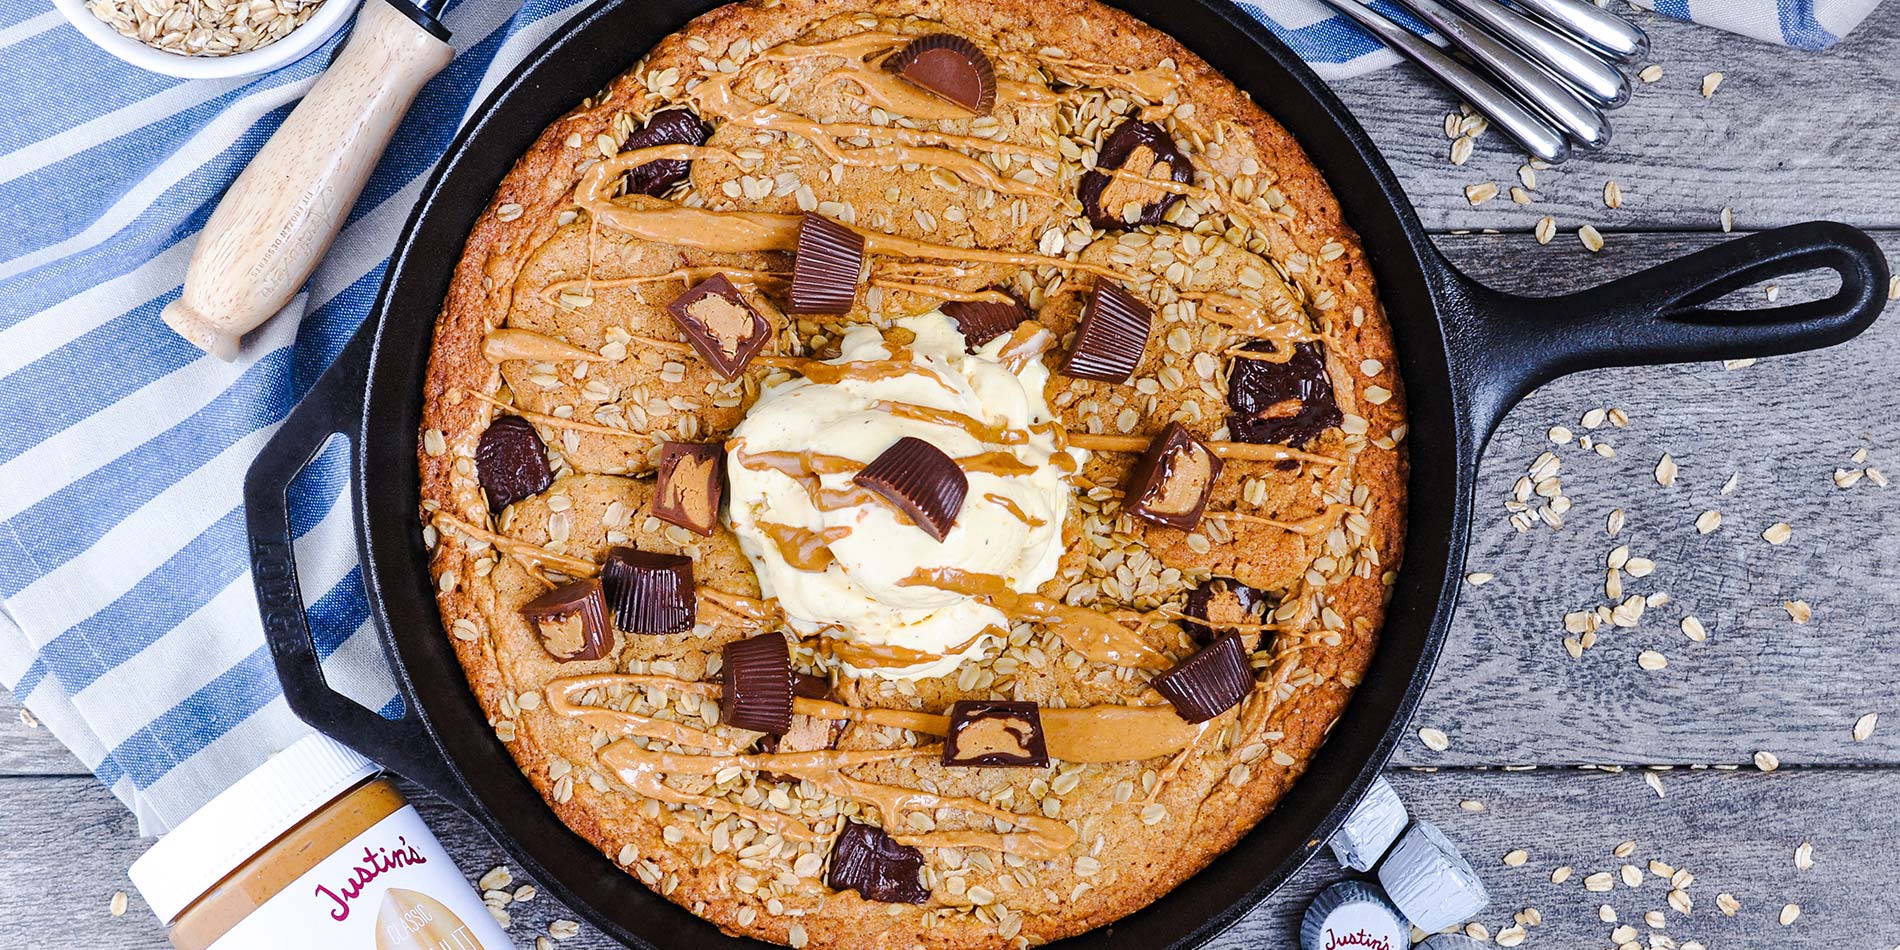 Peanut Butter Cup Oatmeal Skillet Cookie on cloth with oatmeal flakes in a bowl and scattered on a gray wooden background